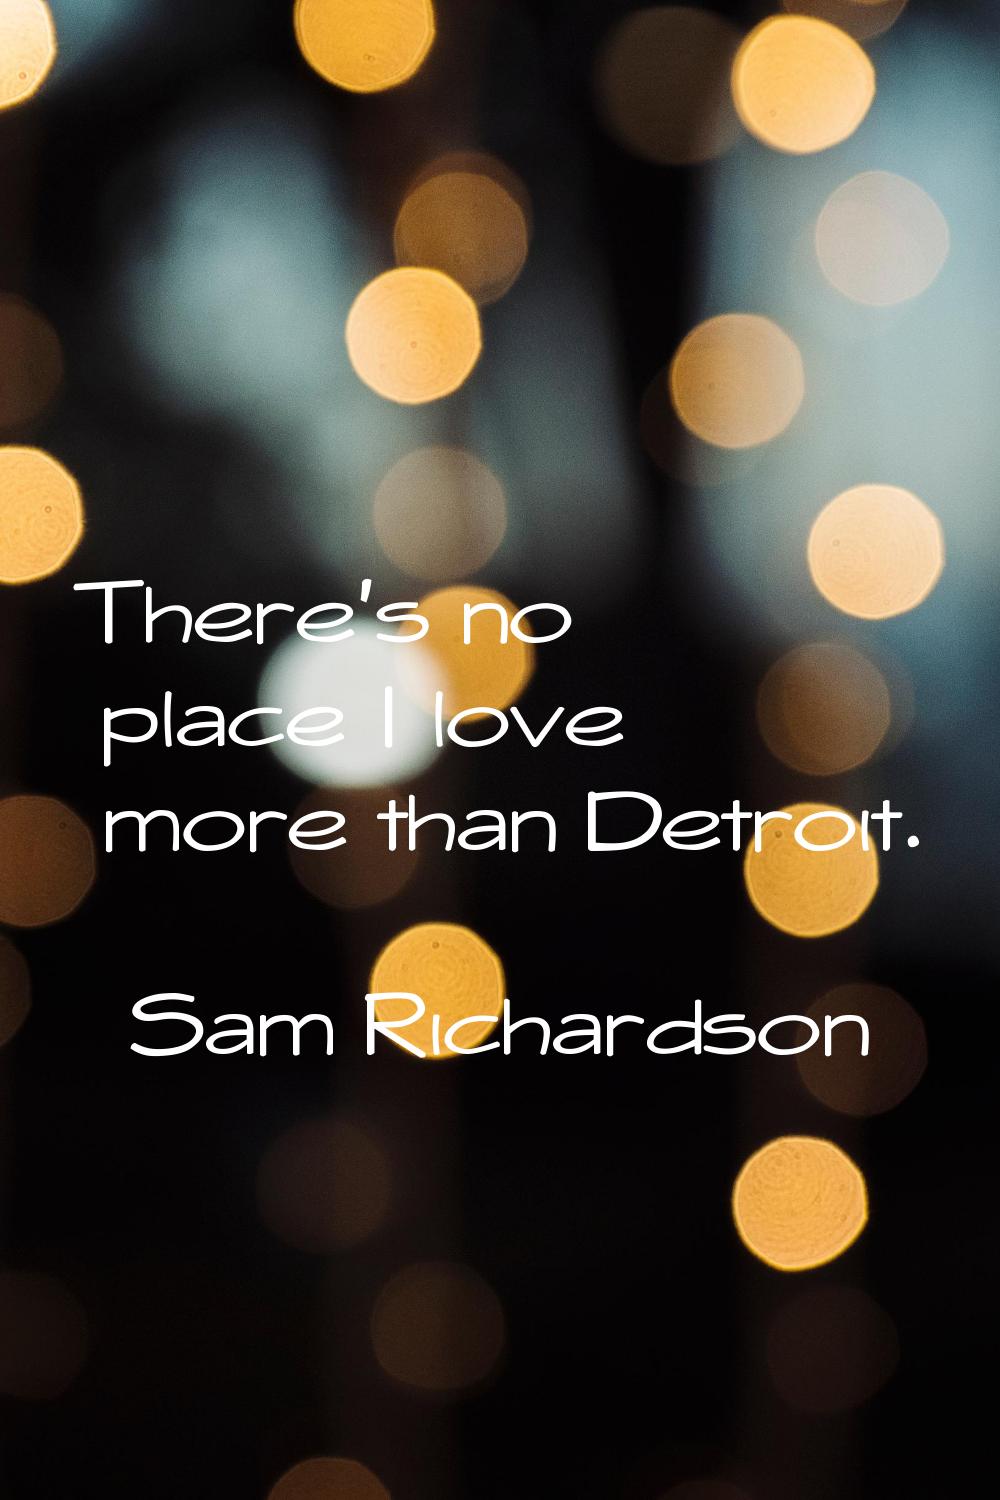 There's no place I love more than Detroit.